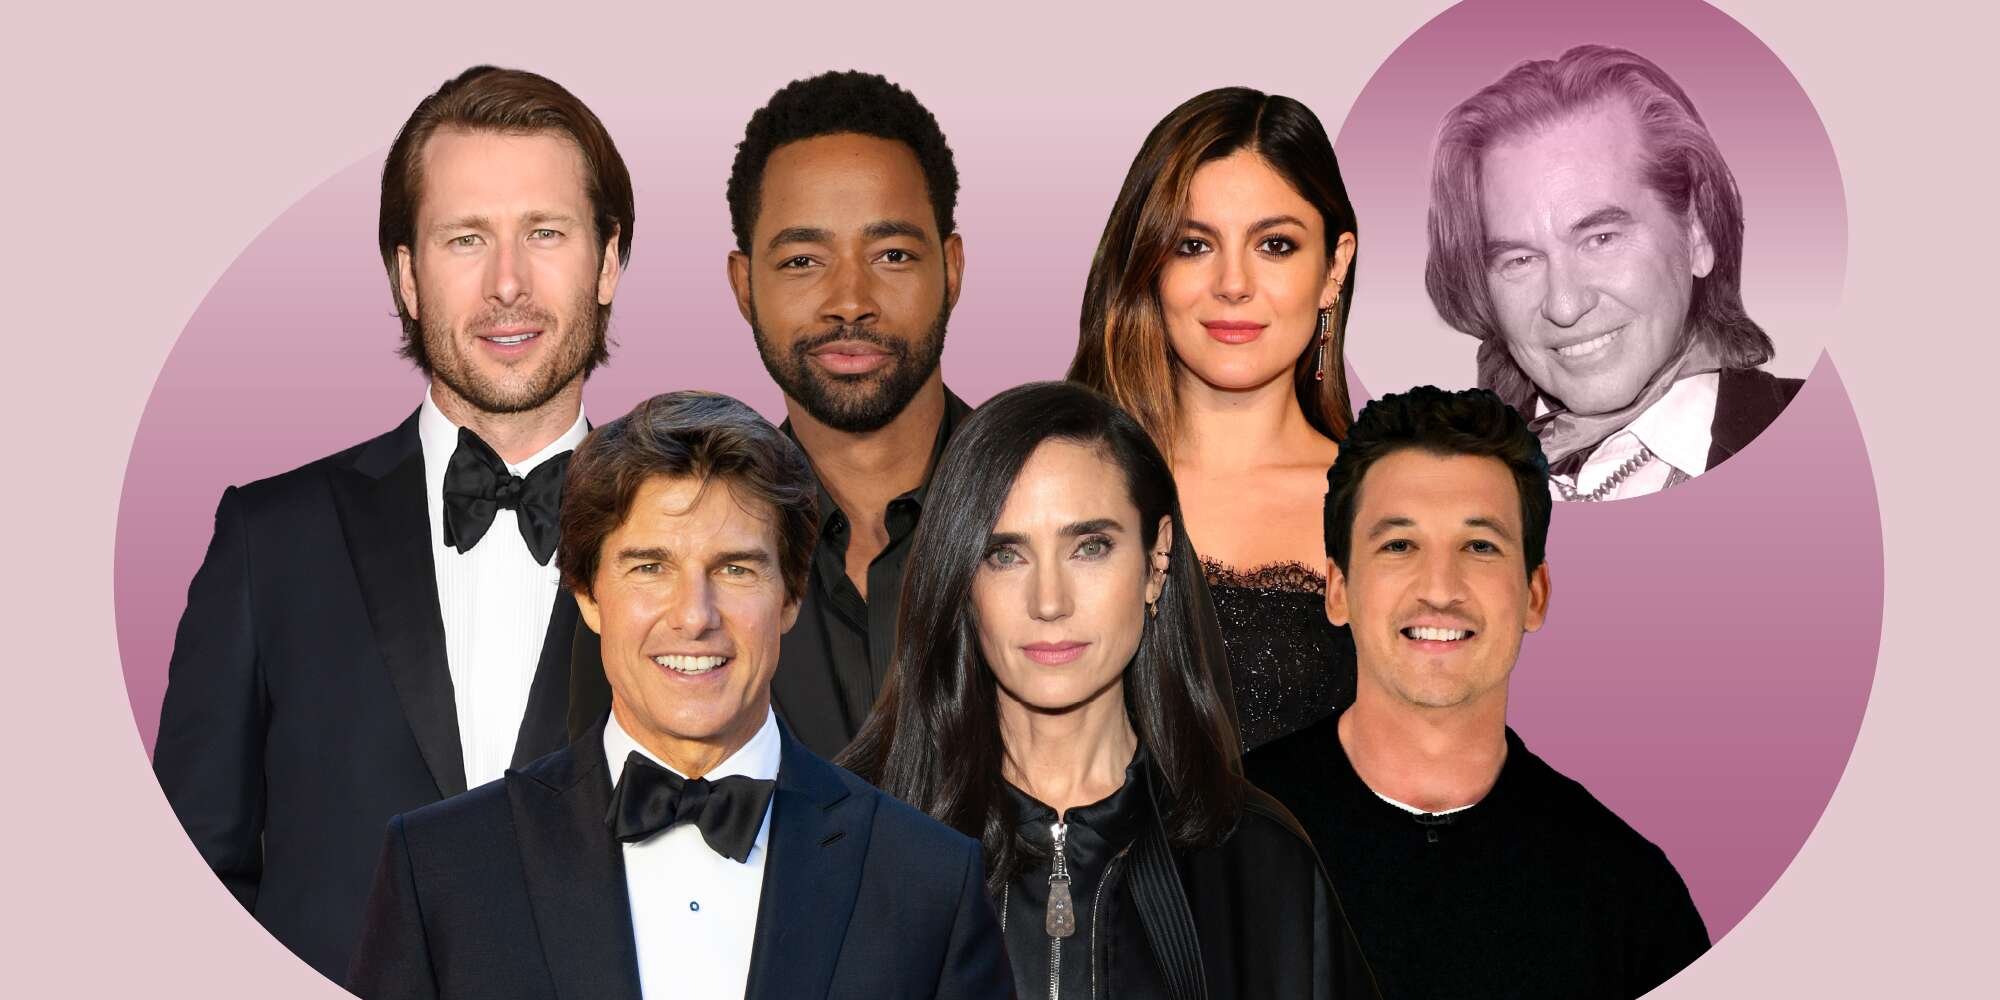 Val Kilmer celebrates 'perfect' Top Gun: Maverick cast for EW's 2022 Entertainers of the Year